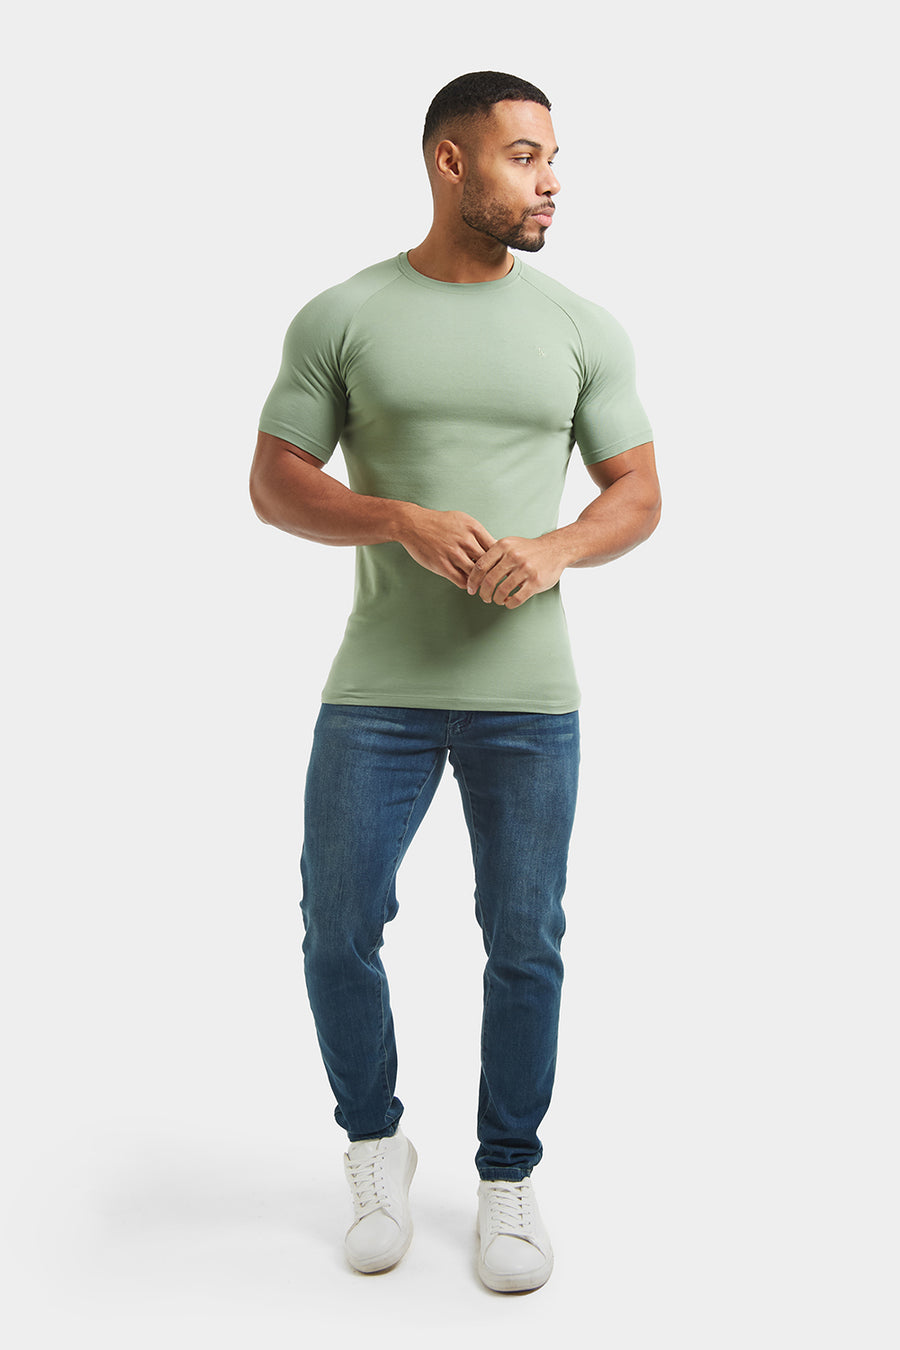 Premium Athletic Fit T-Shirt in Sage - TAILORED ATHLETE - USA